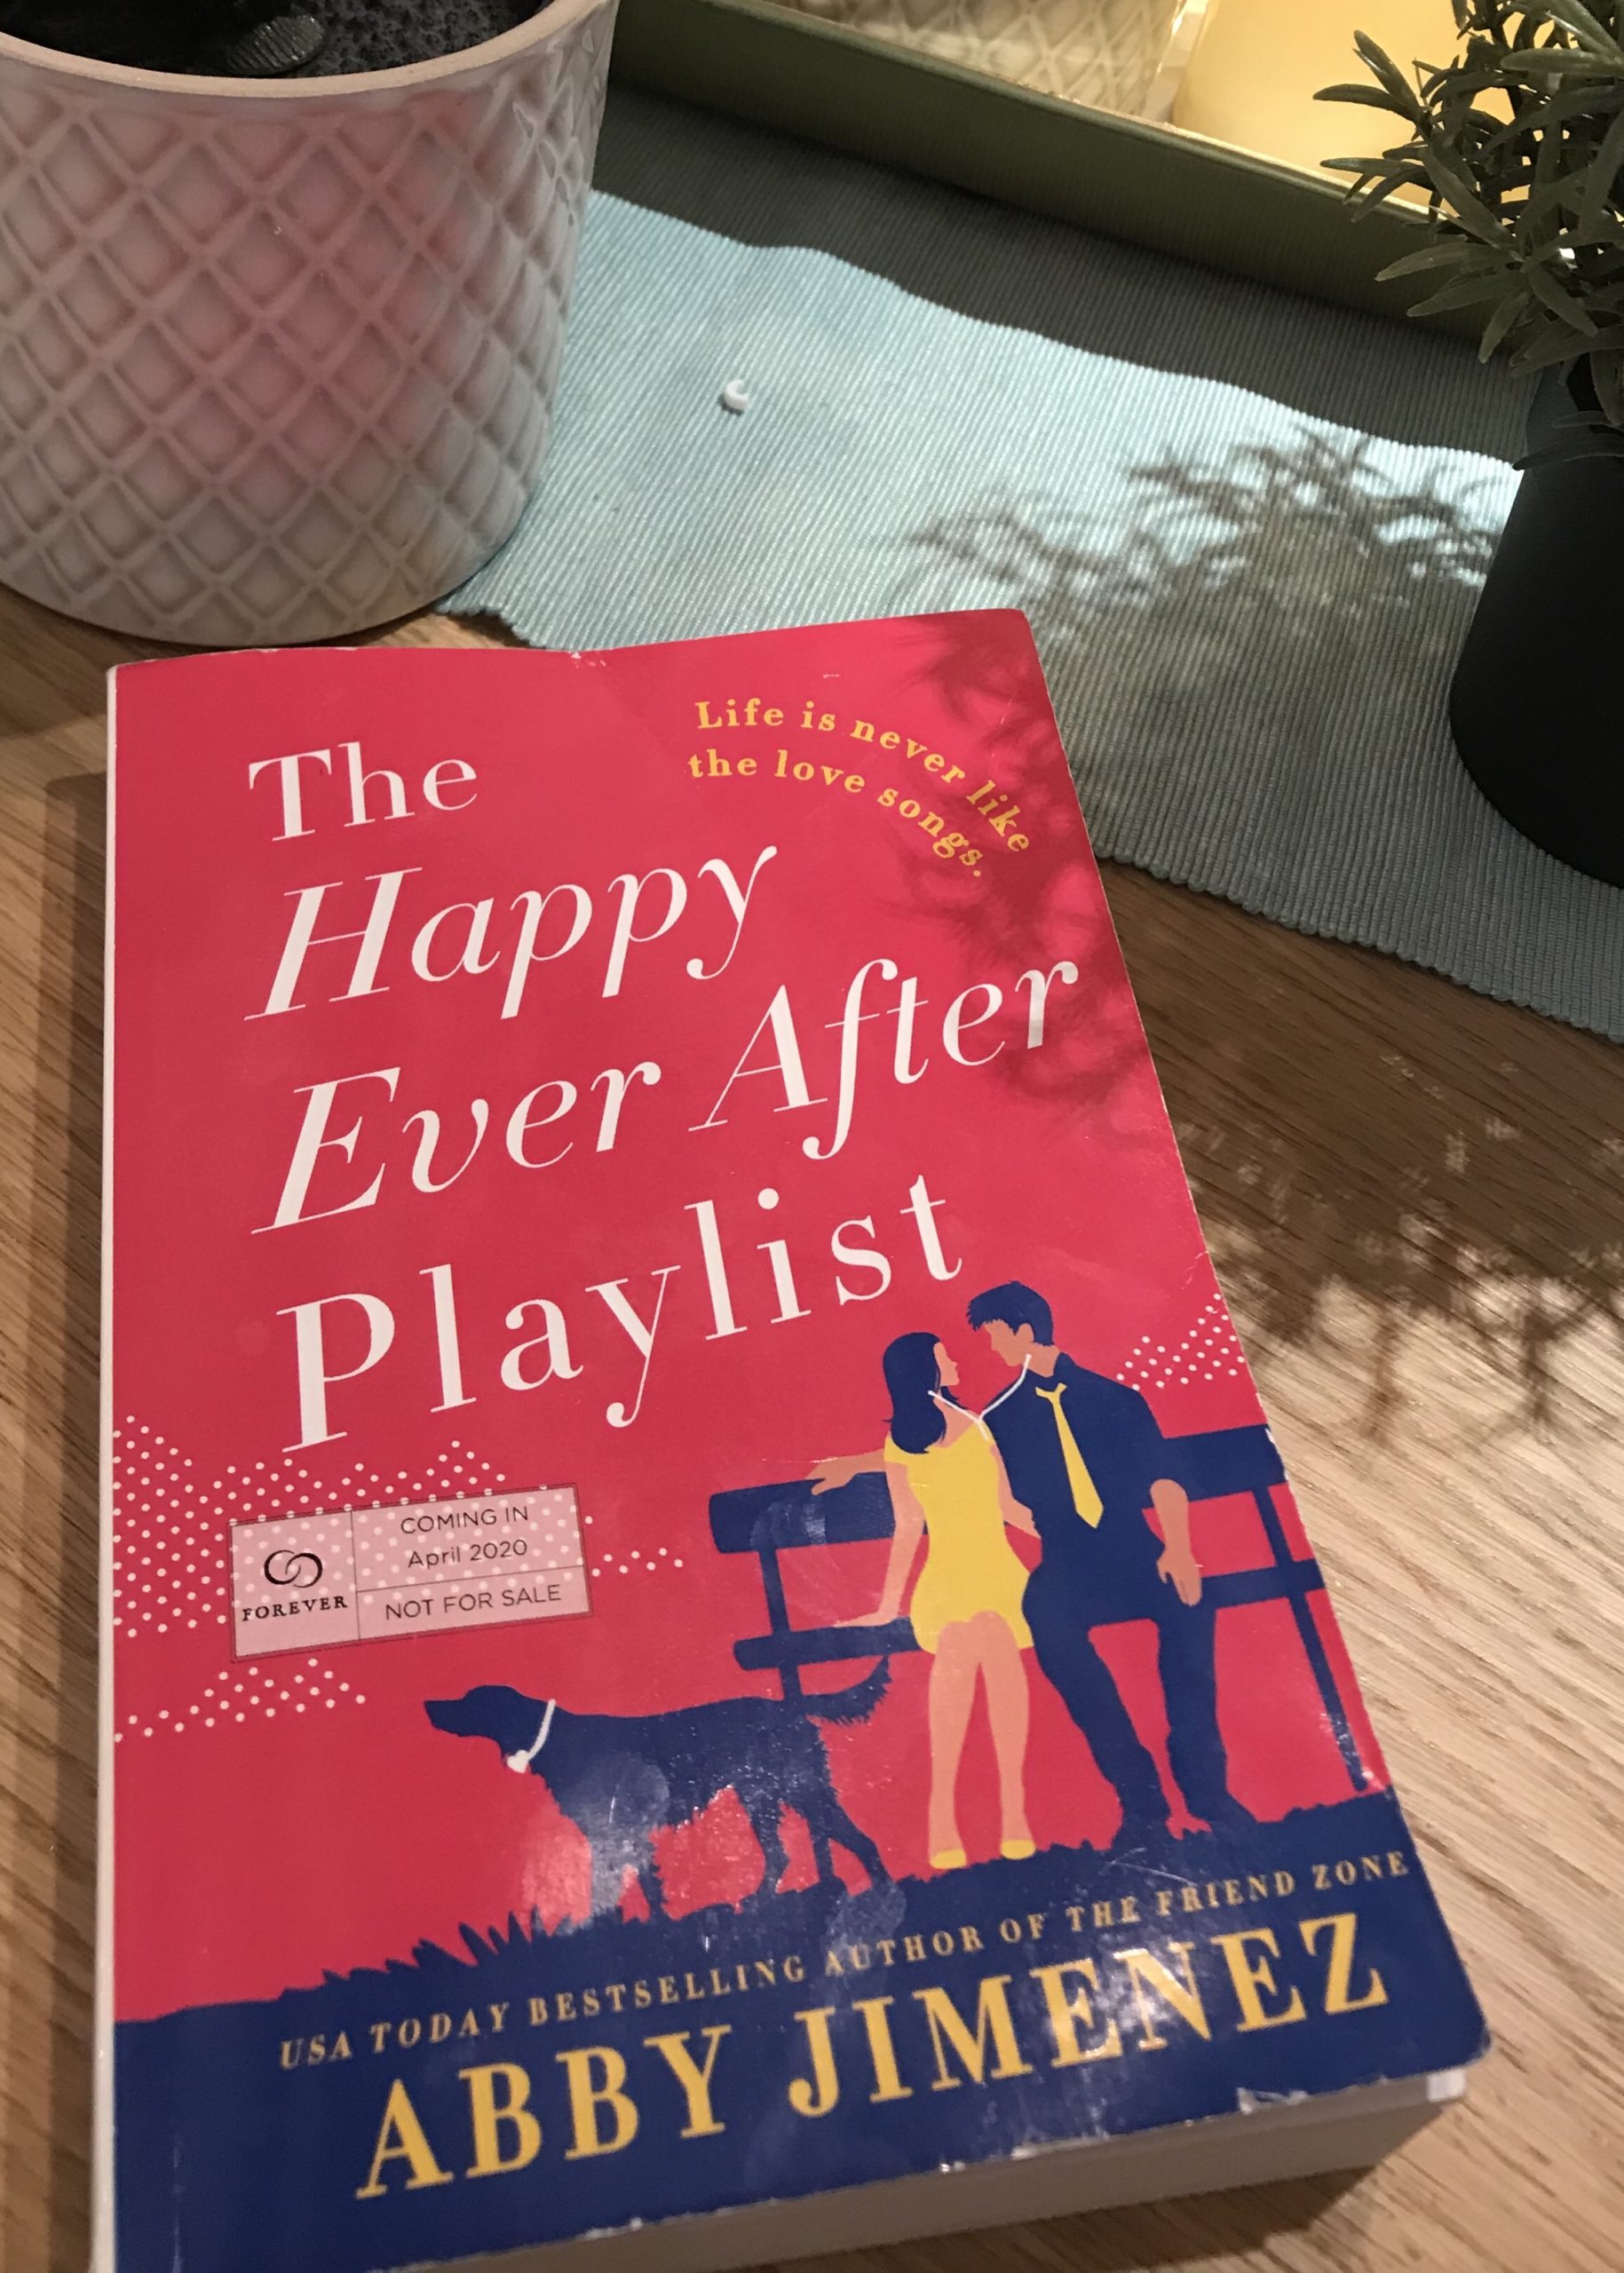 the happy after playlist